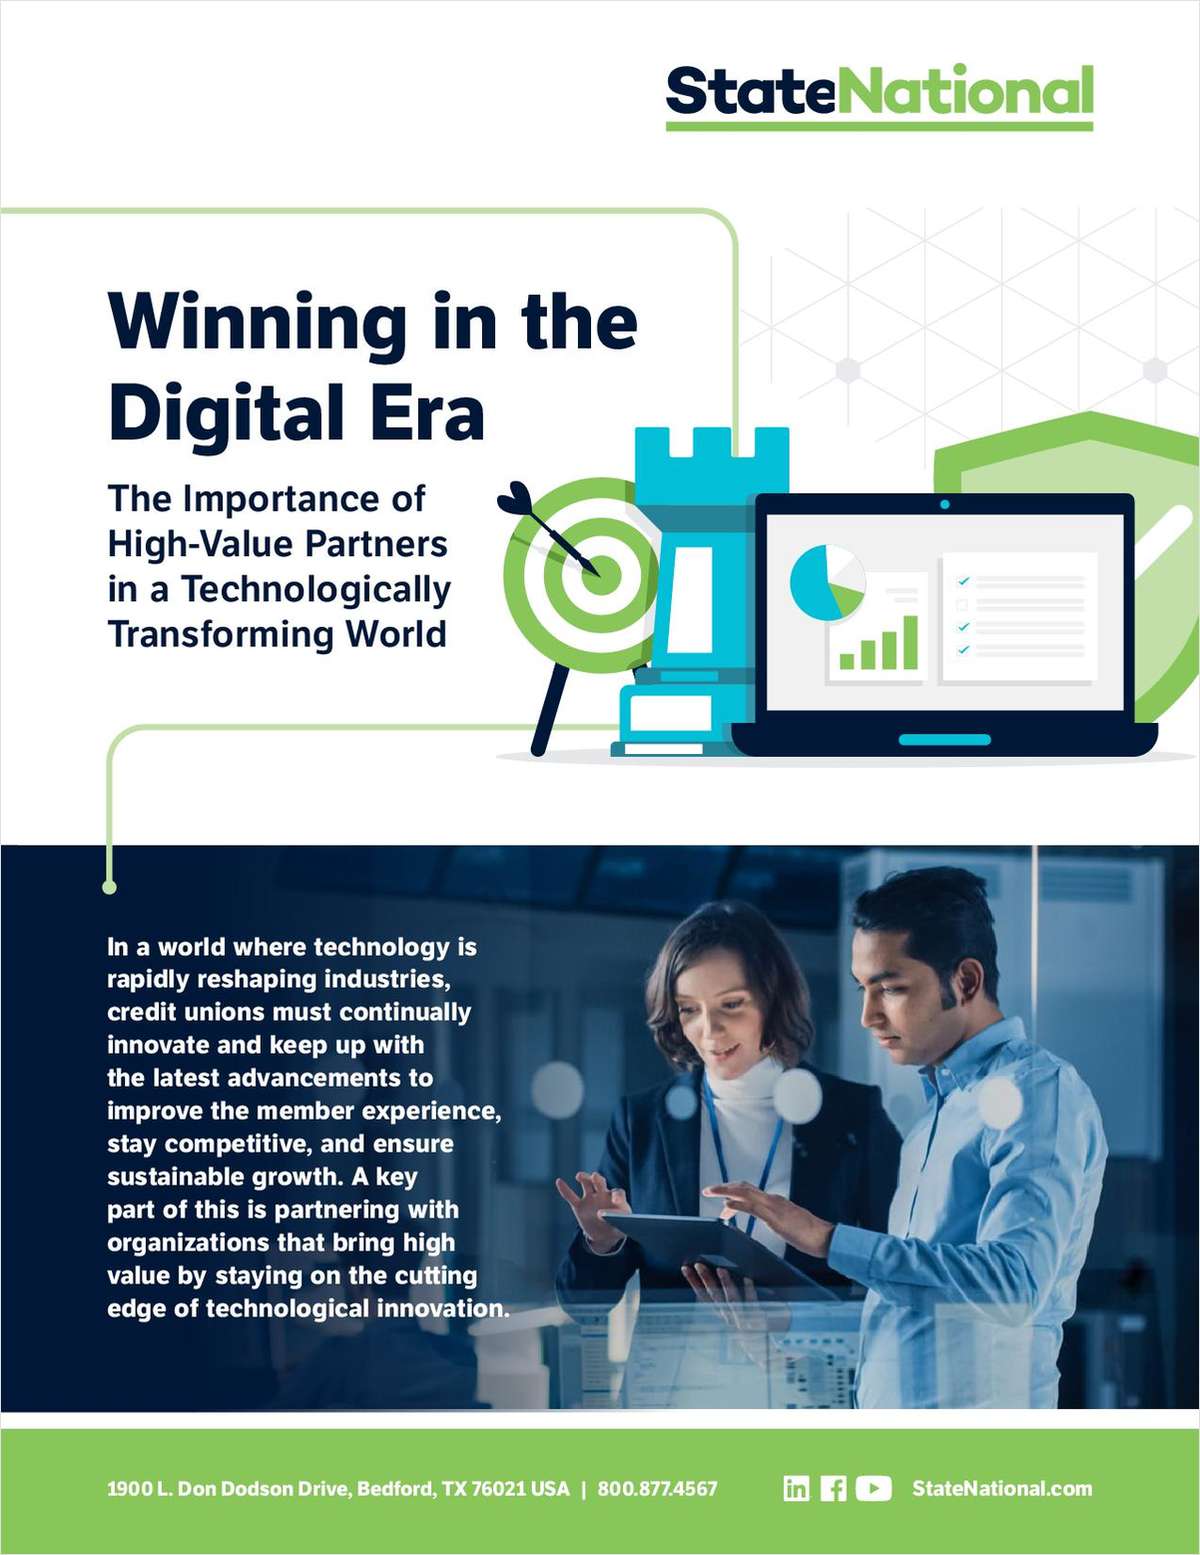 Winning in the Digital Era: The Importance of High-Value Partners in a Technologically Transforming World link